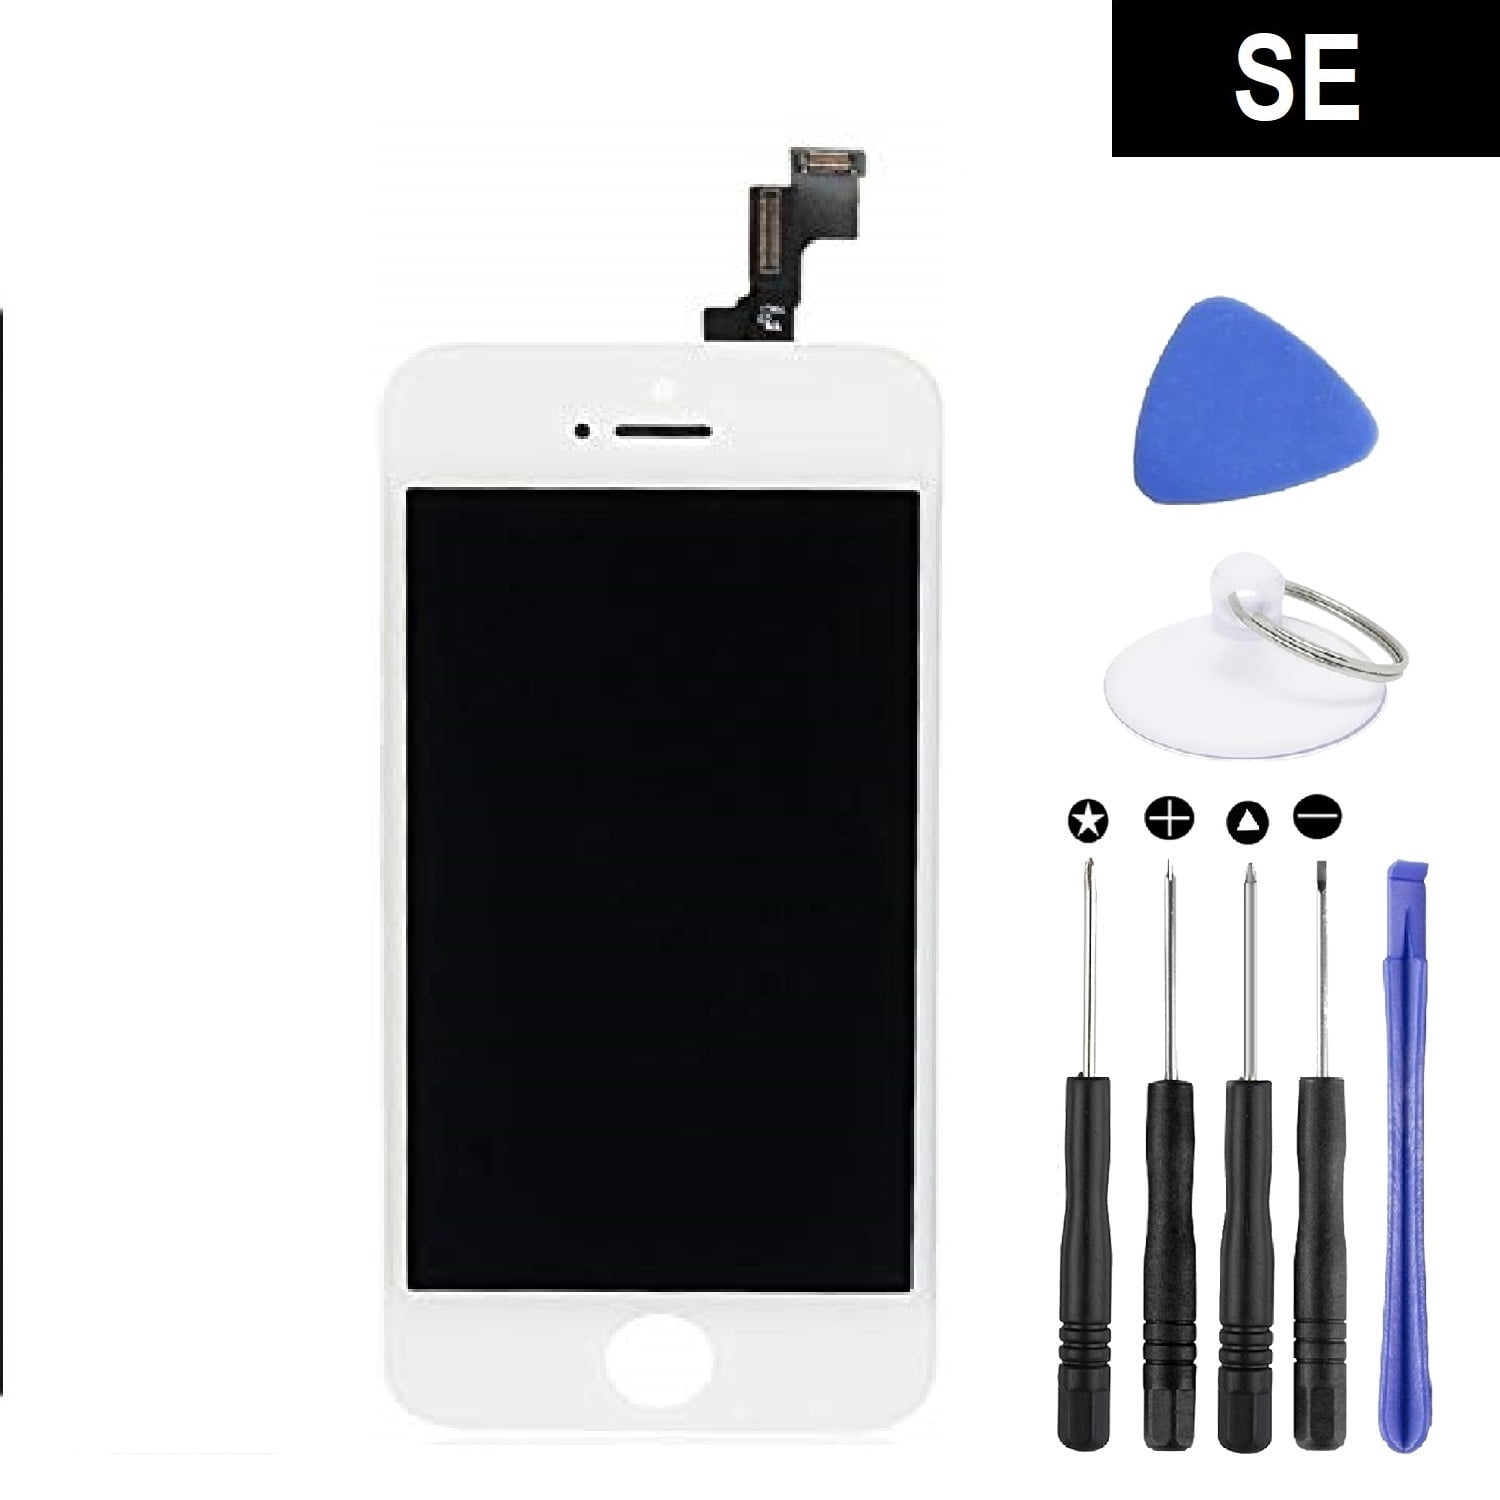 Screen Replacement For Iphone Se 4 White Lcd Display With Toolkit By Loctus Walmart Com Walmart Com